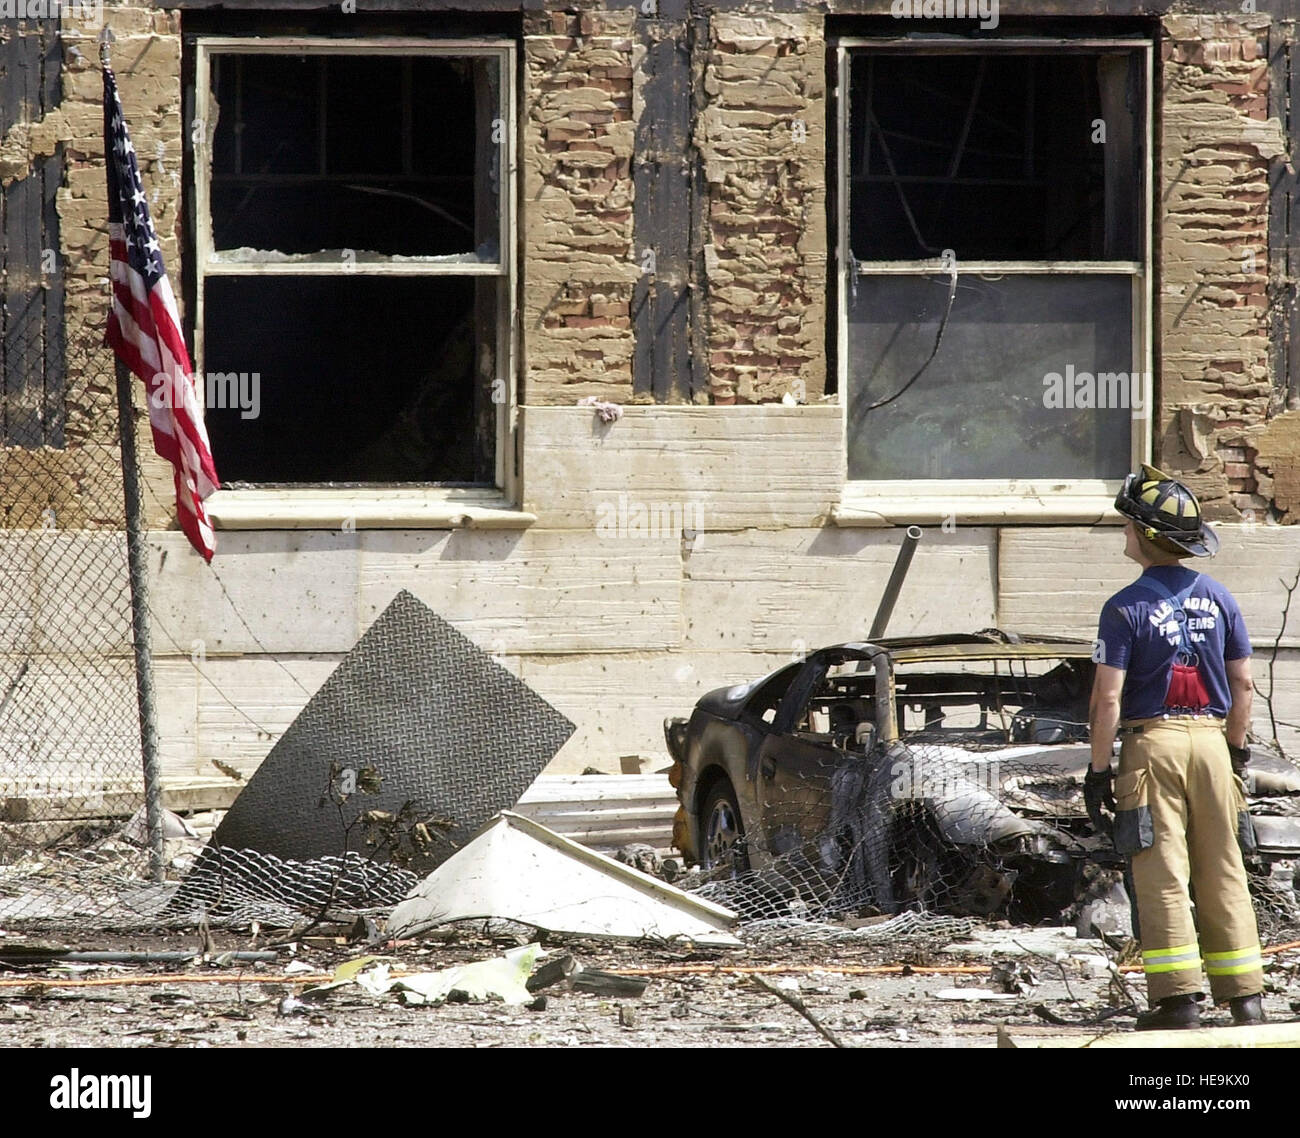 Standing before a burned out hulk of an automobile an Alexandria fireman inspects the damage to the Pentagon. The US flag is set outside the Pentagon after a hijacked American Airlines Flight 77, a Boeing 757-200 was deliberately crashed into Pentagon, September 11, 2001. The Pentagon attack followed an attack on the twin towers of the New York World Trade Center, where two fully loaded passenger airliners were flown into the buildings, in what is called the worst terrorist attack in history. Stock Photo